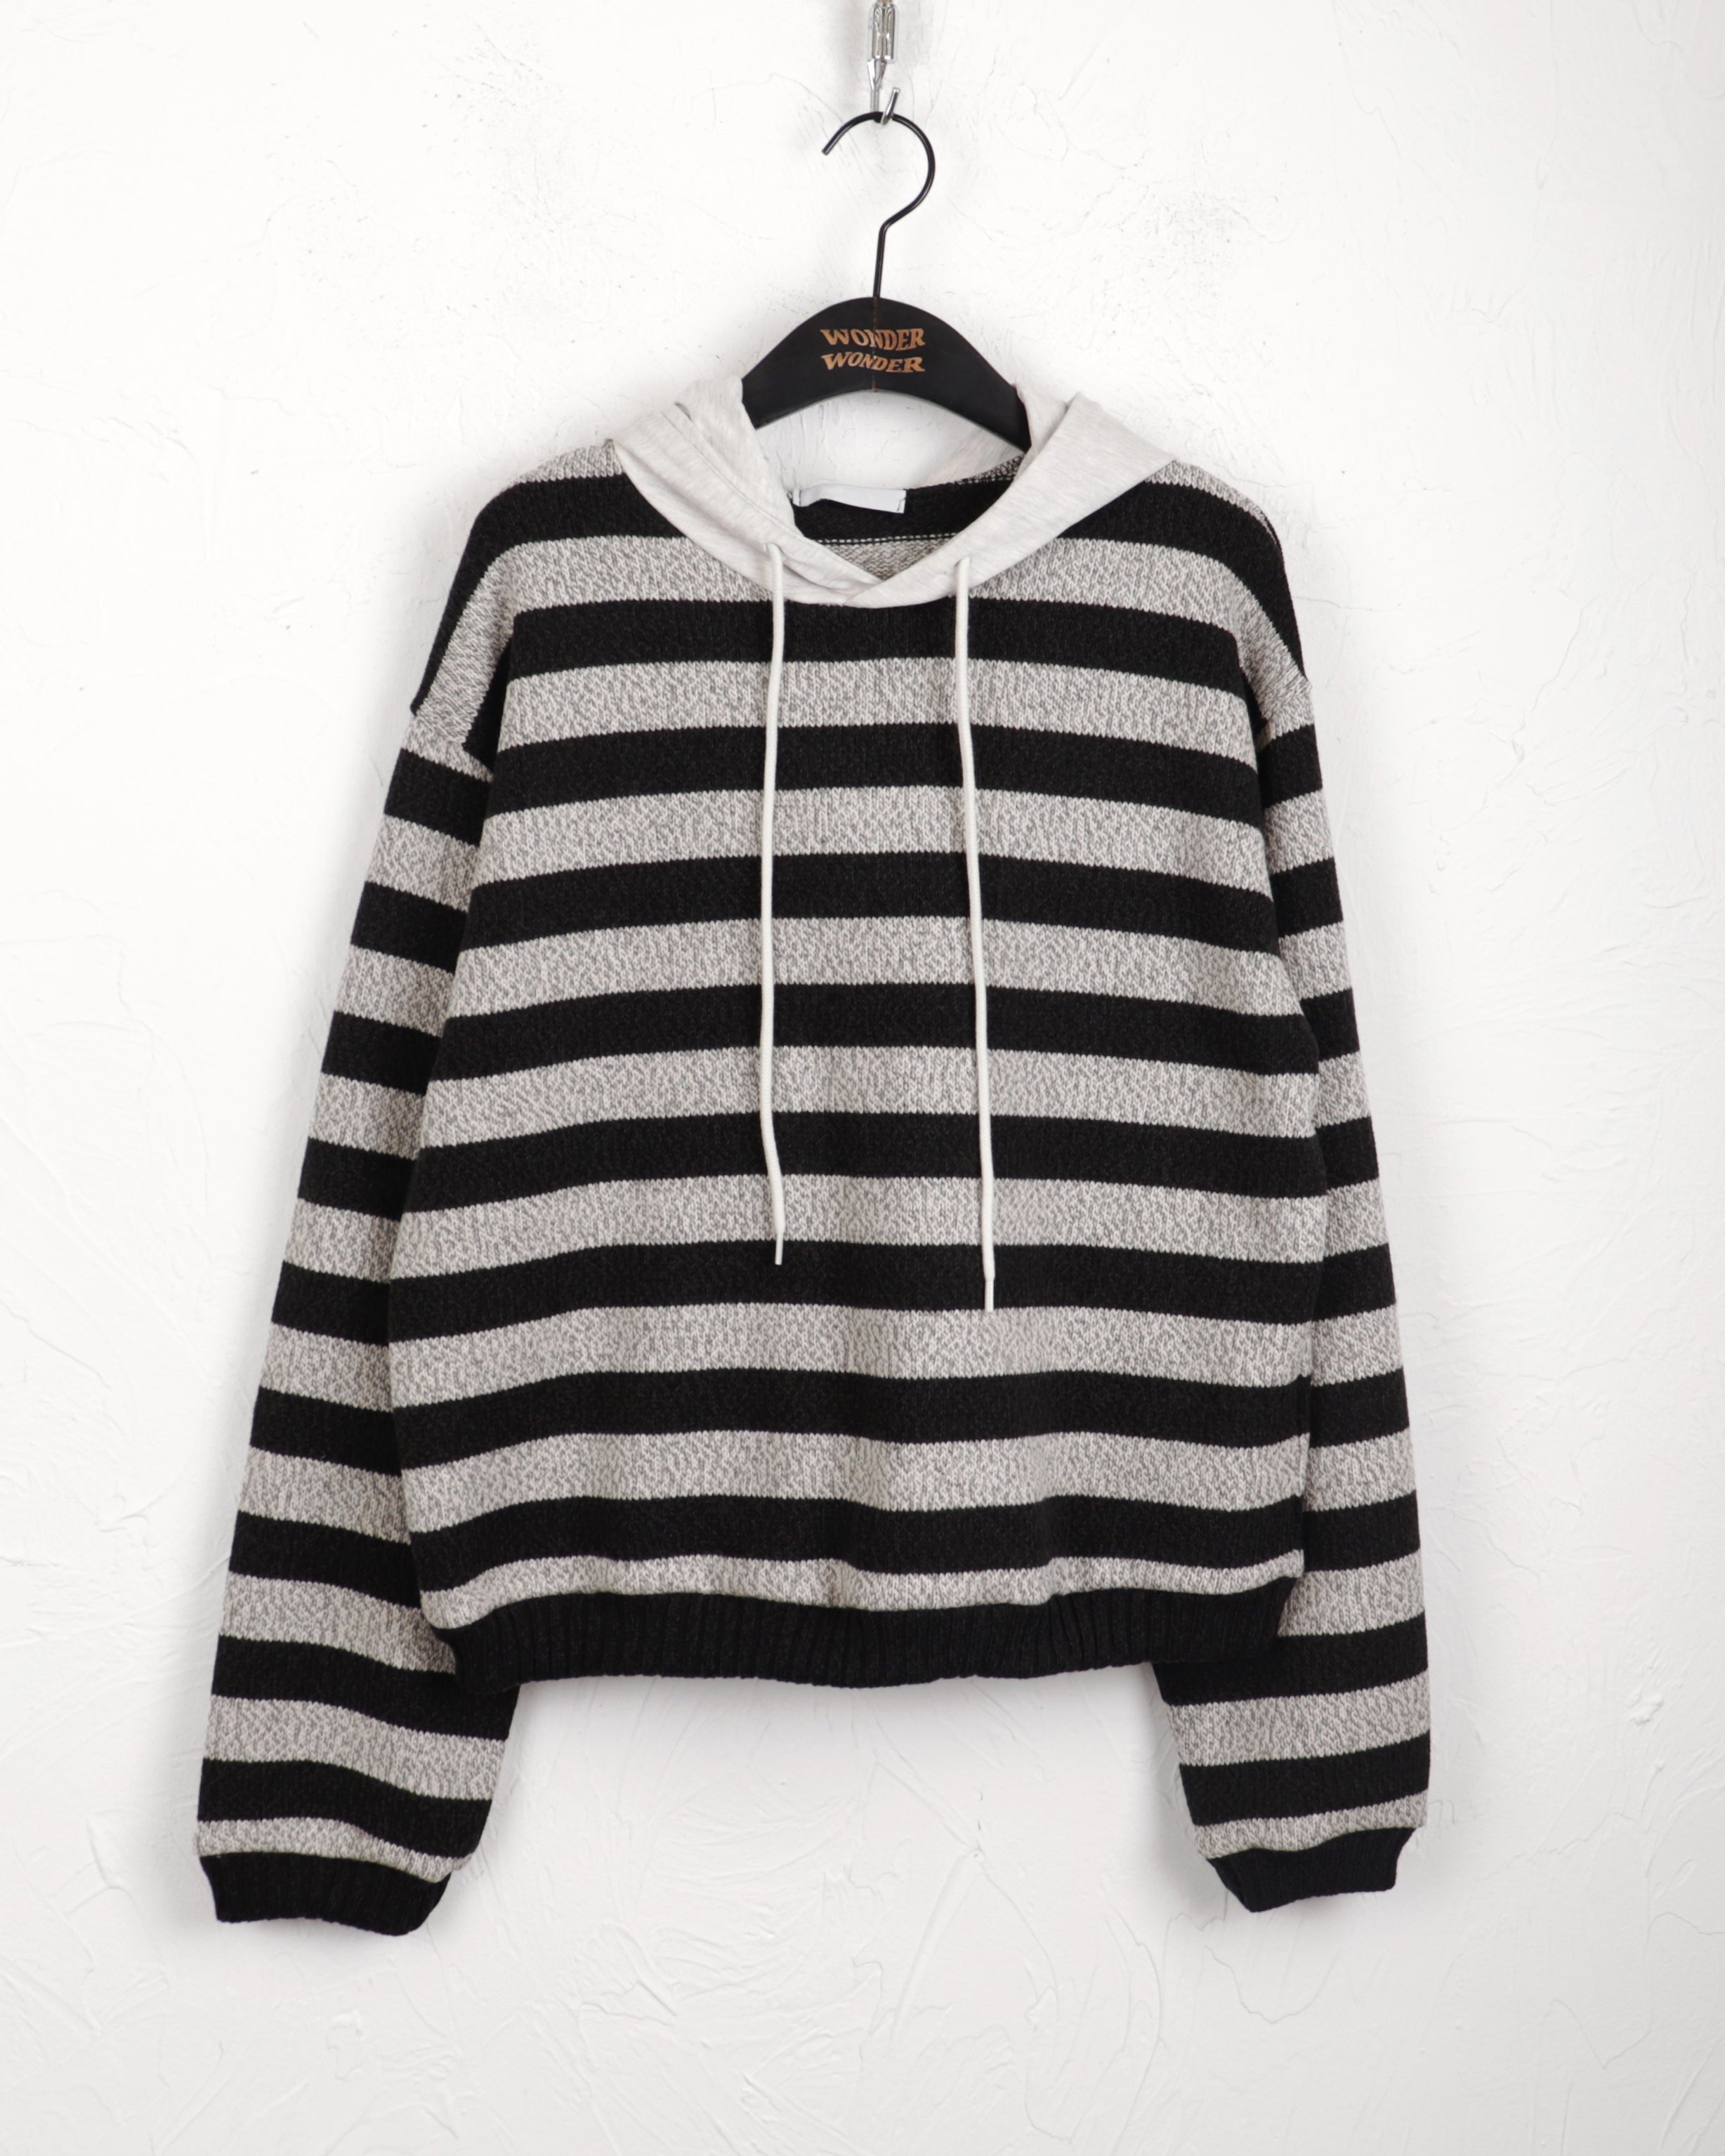 Fonyl hooded layered striped knit